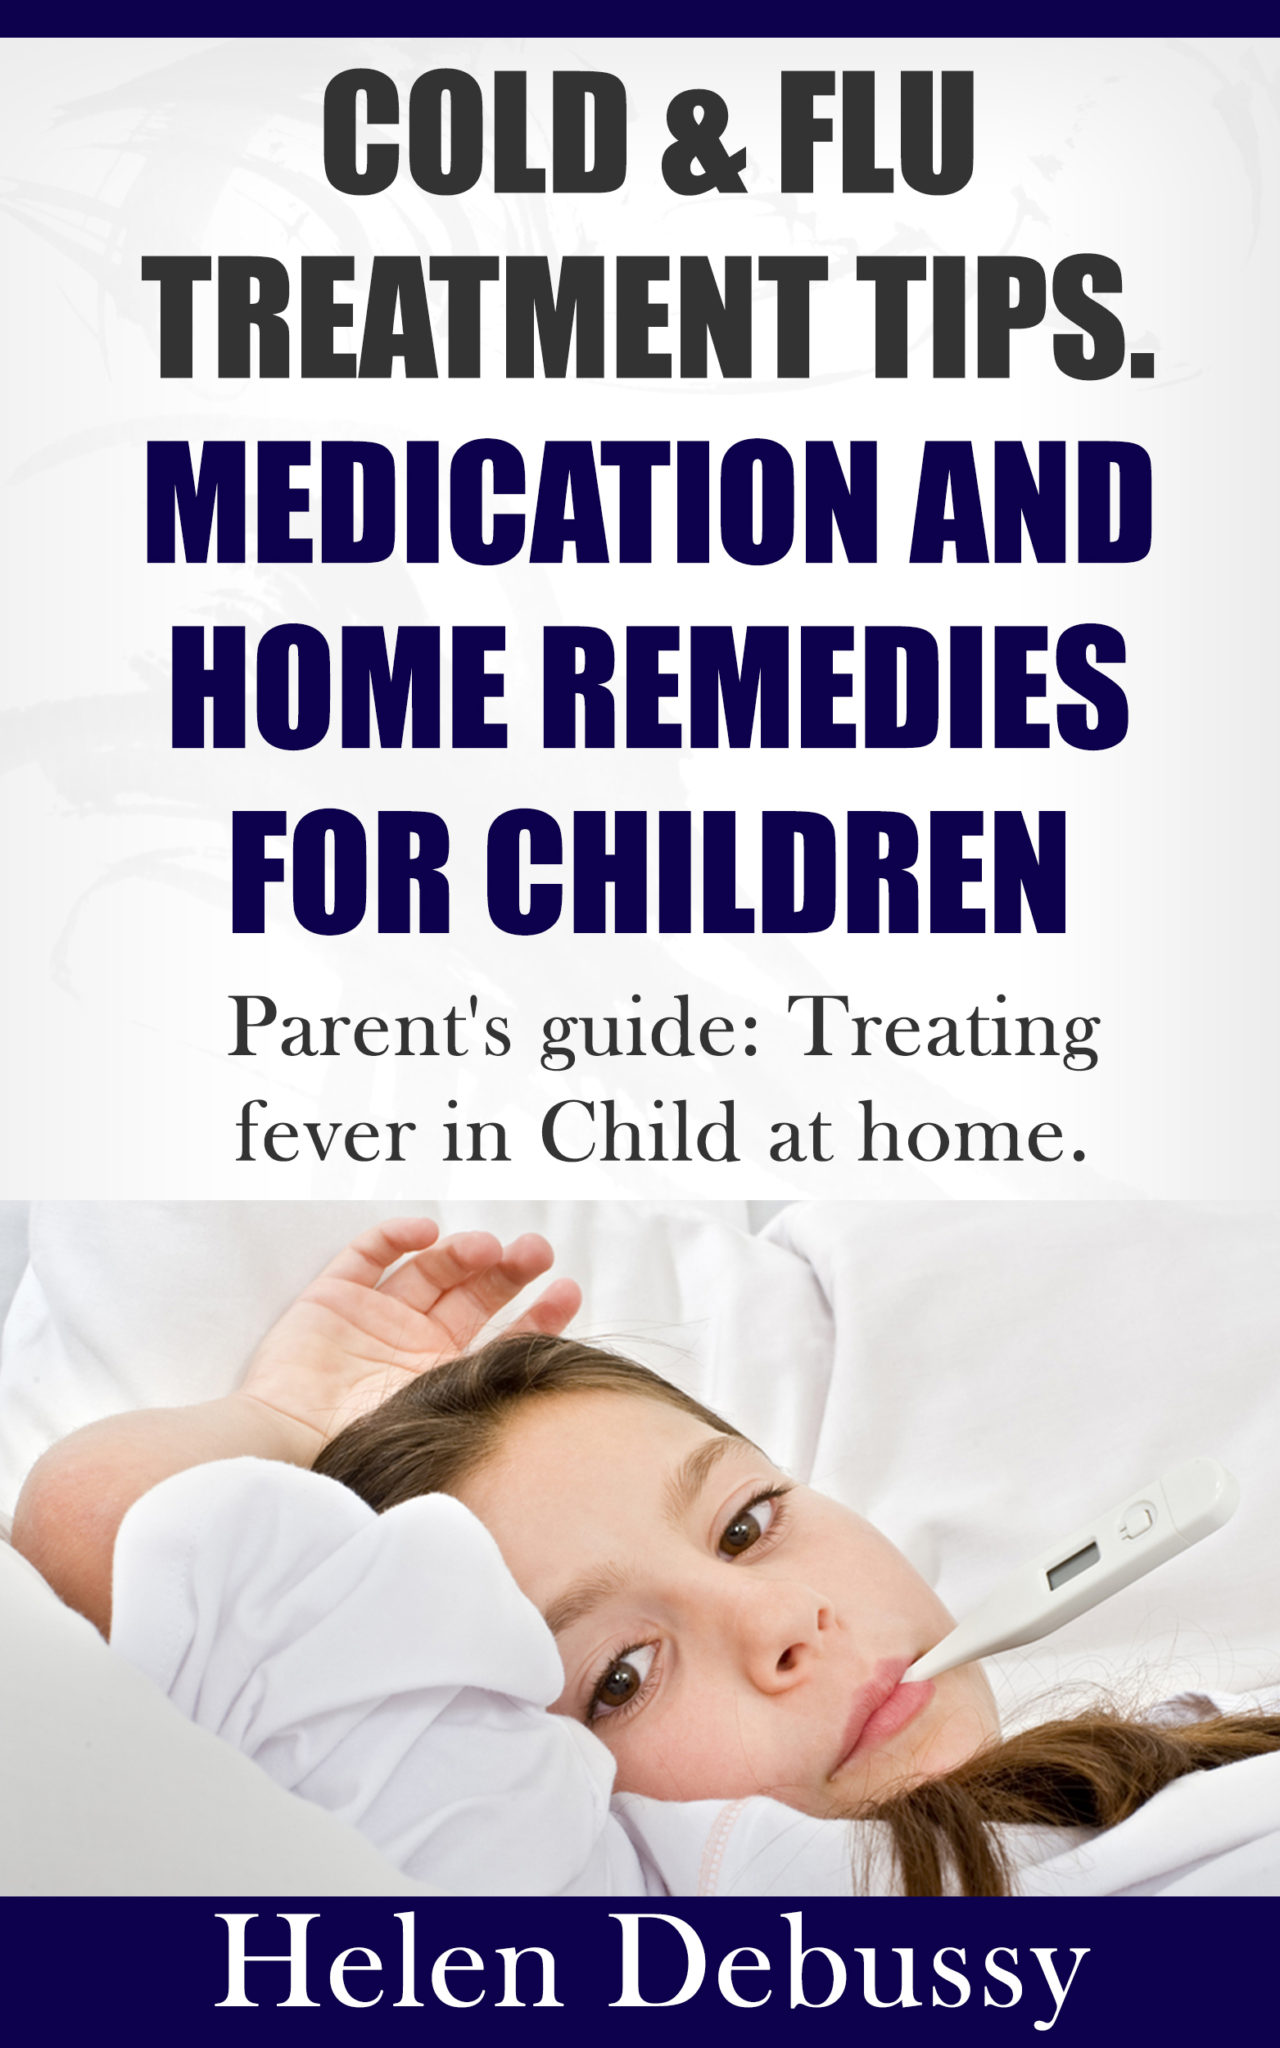 FREE: Cold & Flu Treatment Tips Medication and Home Remedies for Children: Parent’s Guide: Treating Fever in Child at Home by Helen Debussy